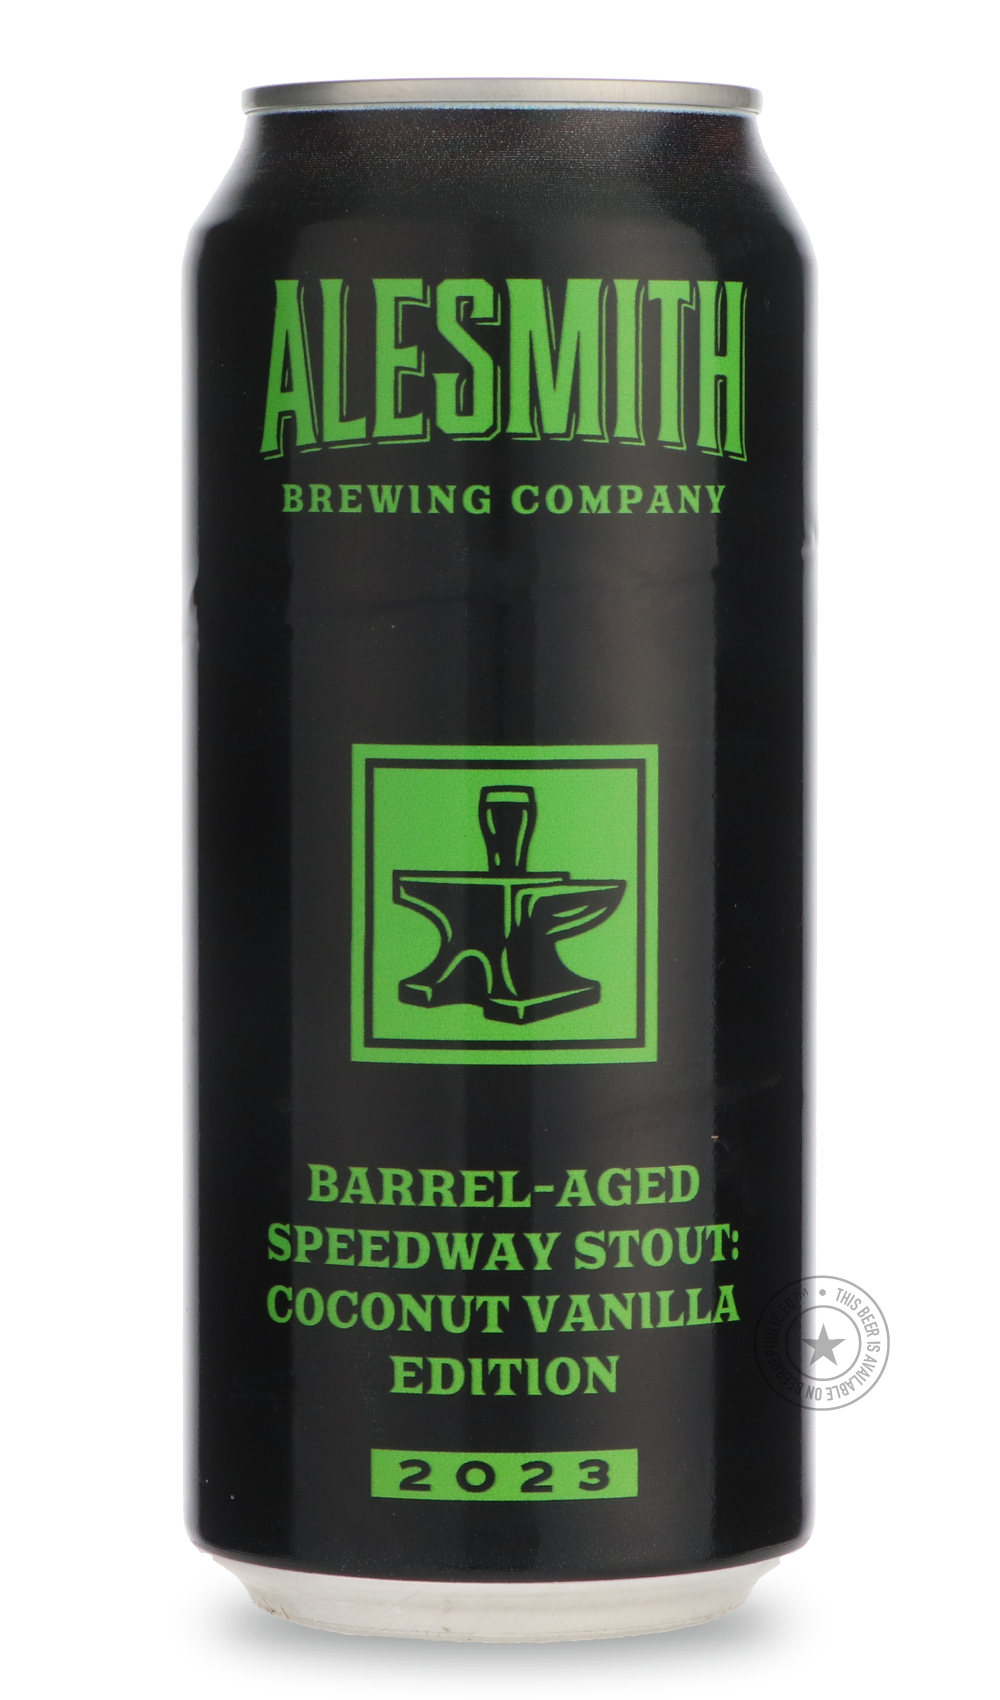 -AleSmith- Barrel Aged Speedway Stout: Coconut Vanilla-Stout & Porter- Only @ Beer Republic - The best online beer store for American & Canadian craft beer - Buy beer online from the USA and Canada - Bier online kopen - Amerikaans bier kopen - Craft beer store - Craft beer kopen - Amerikanisch bier kaufen - Bier online kaufen - Acheter biere online - IPA - Stout - Porter - New England IPA - Hazy IPA - Imperial Stout - Barrel Aged - Barrel Aged Imperial Stout - Brown - Dark beer - Blond - Blonde - Pilsner - 